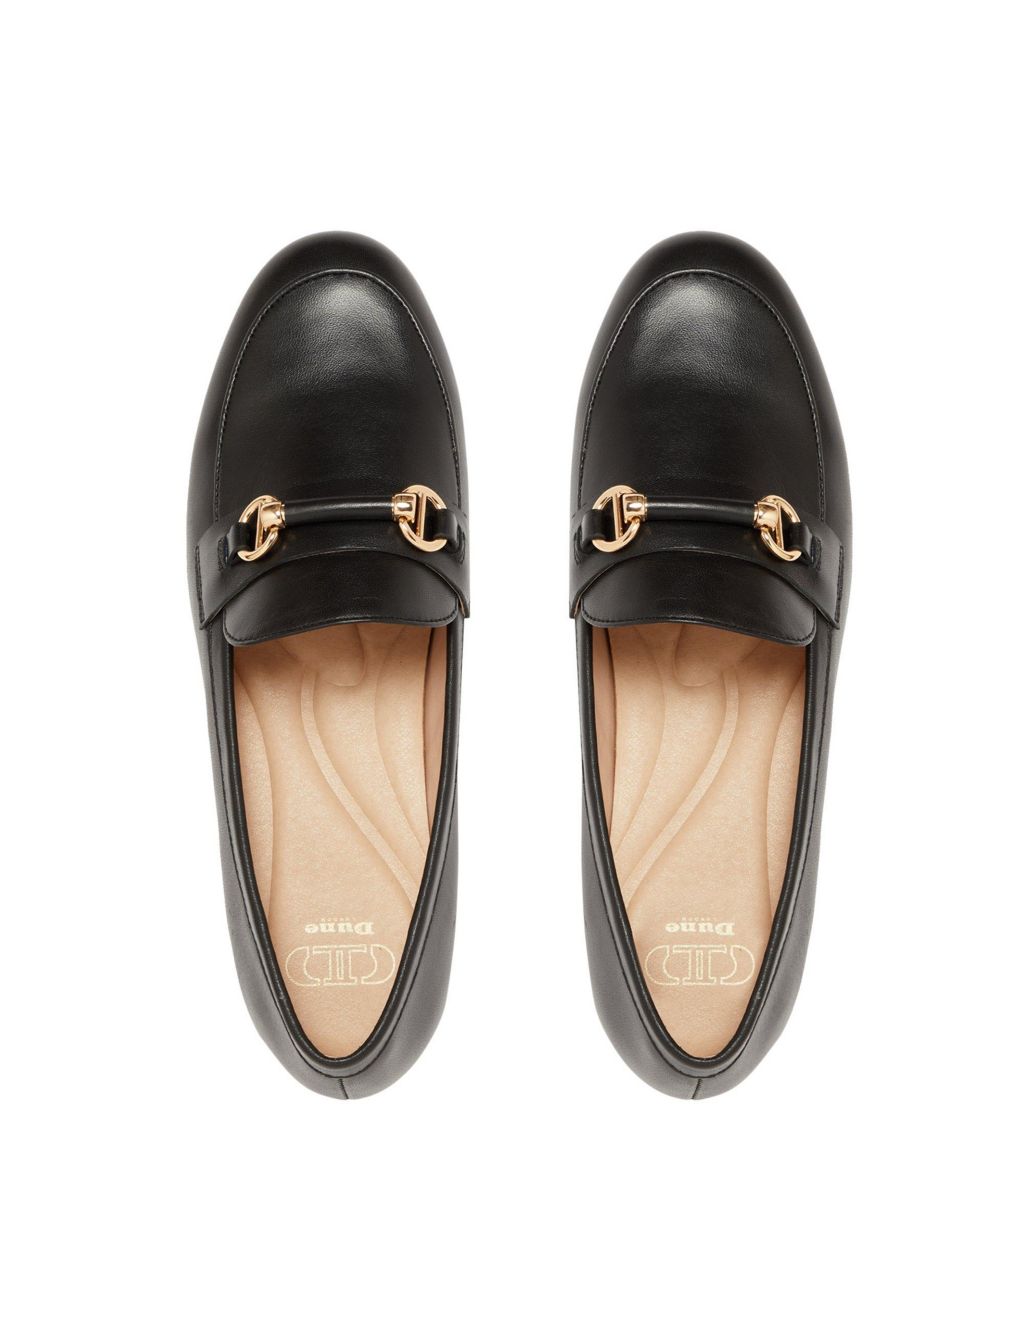 Leather Bar Flat Loafers | Dune London | M&S